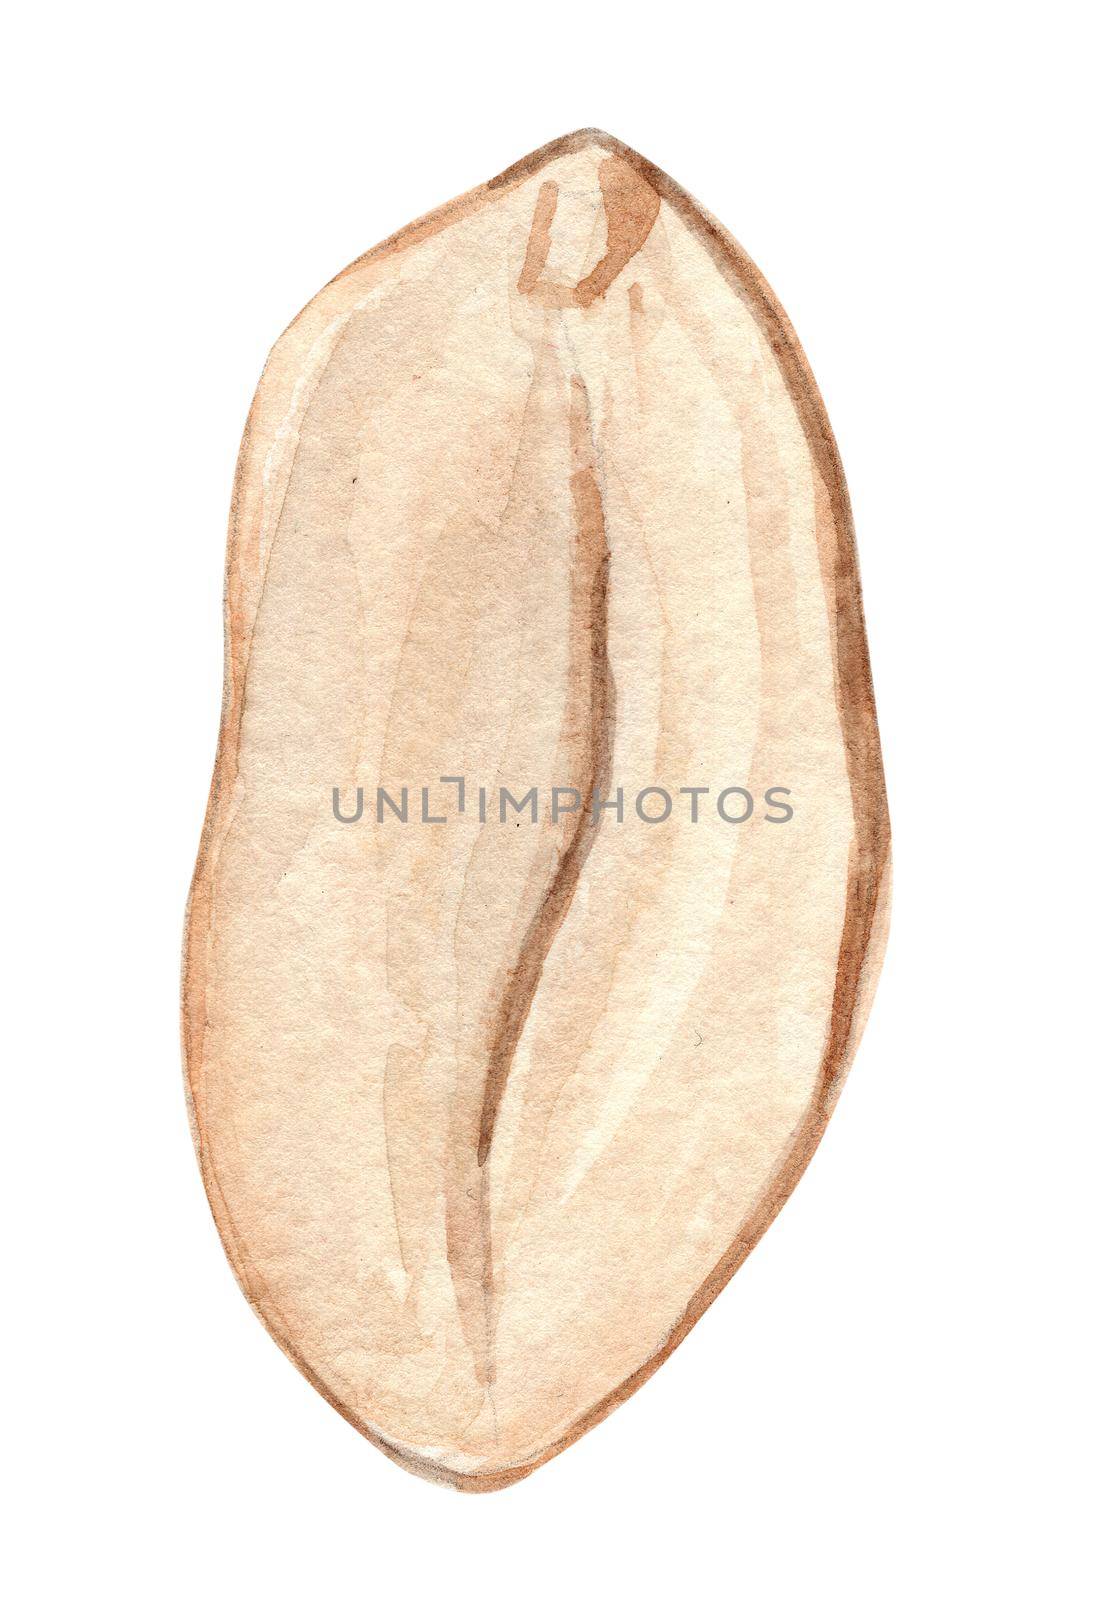 watercolor cut peanut illustration isolated on white by dreamloud